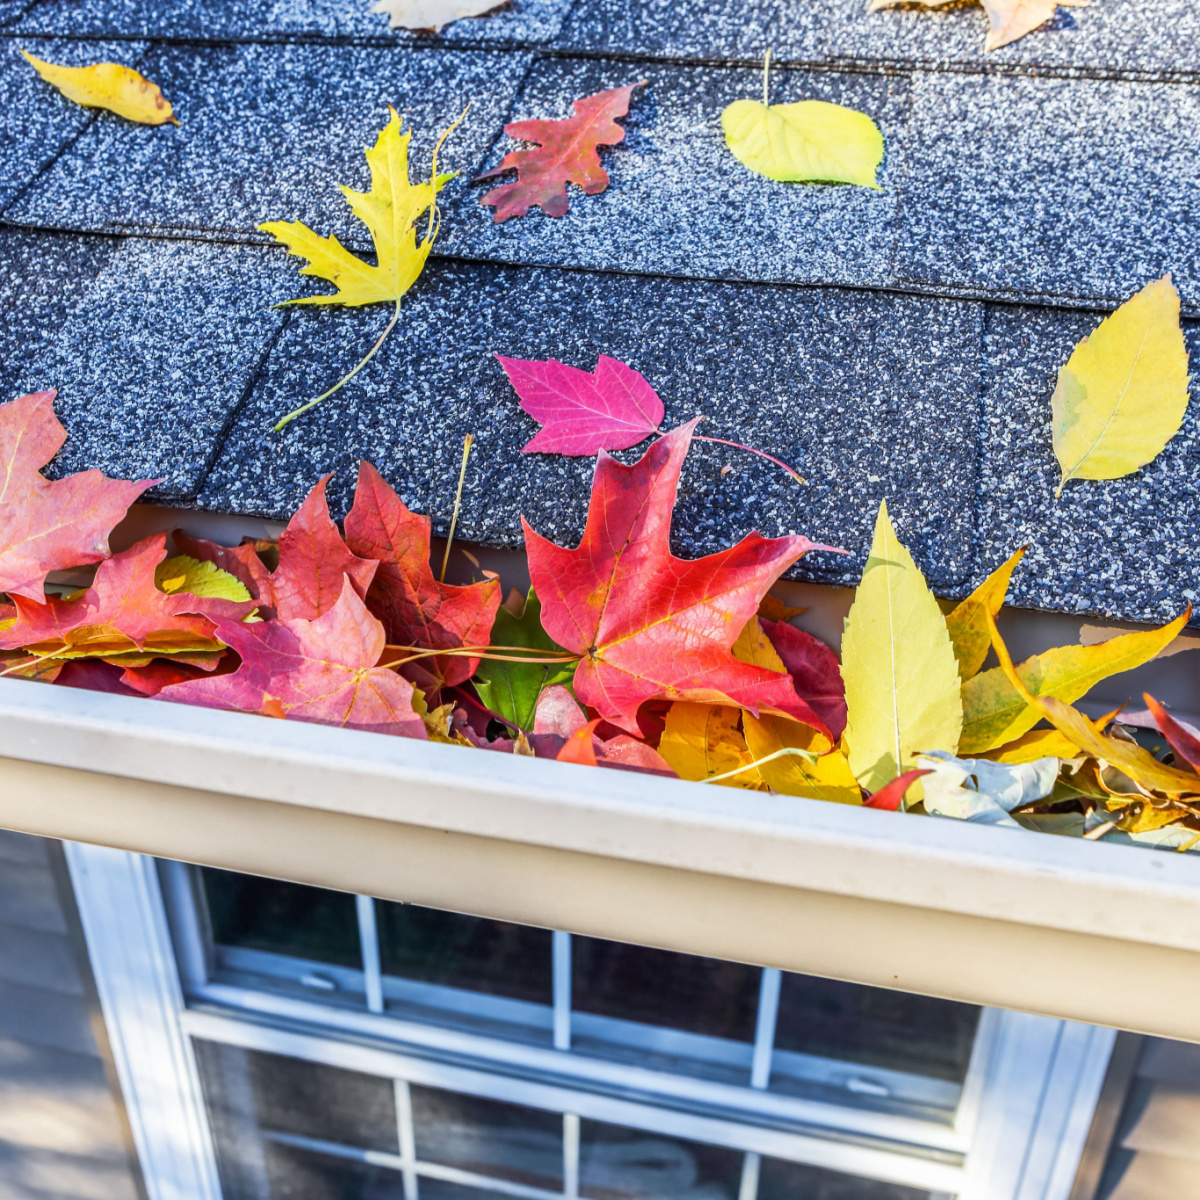 Leaves fall on a roof in need of some Brays Oaks roof repair from a trusted Houston roofing company.